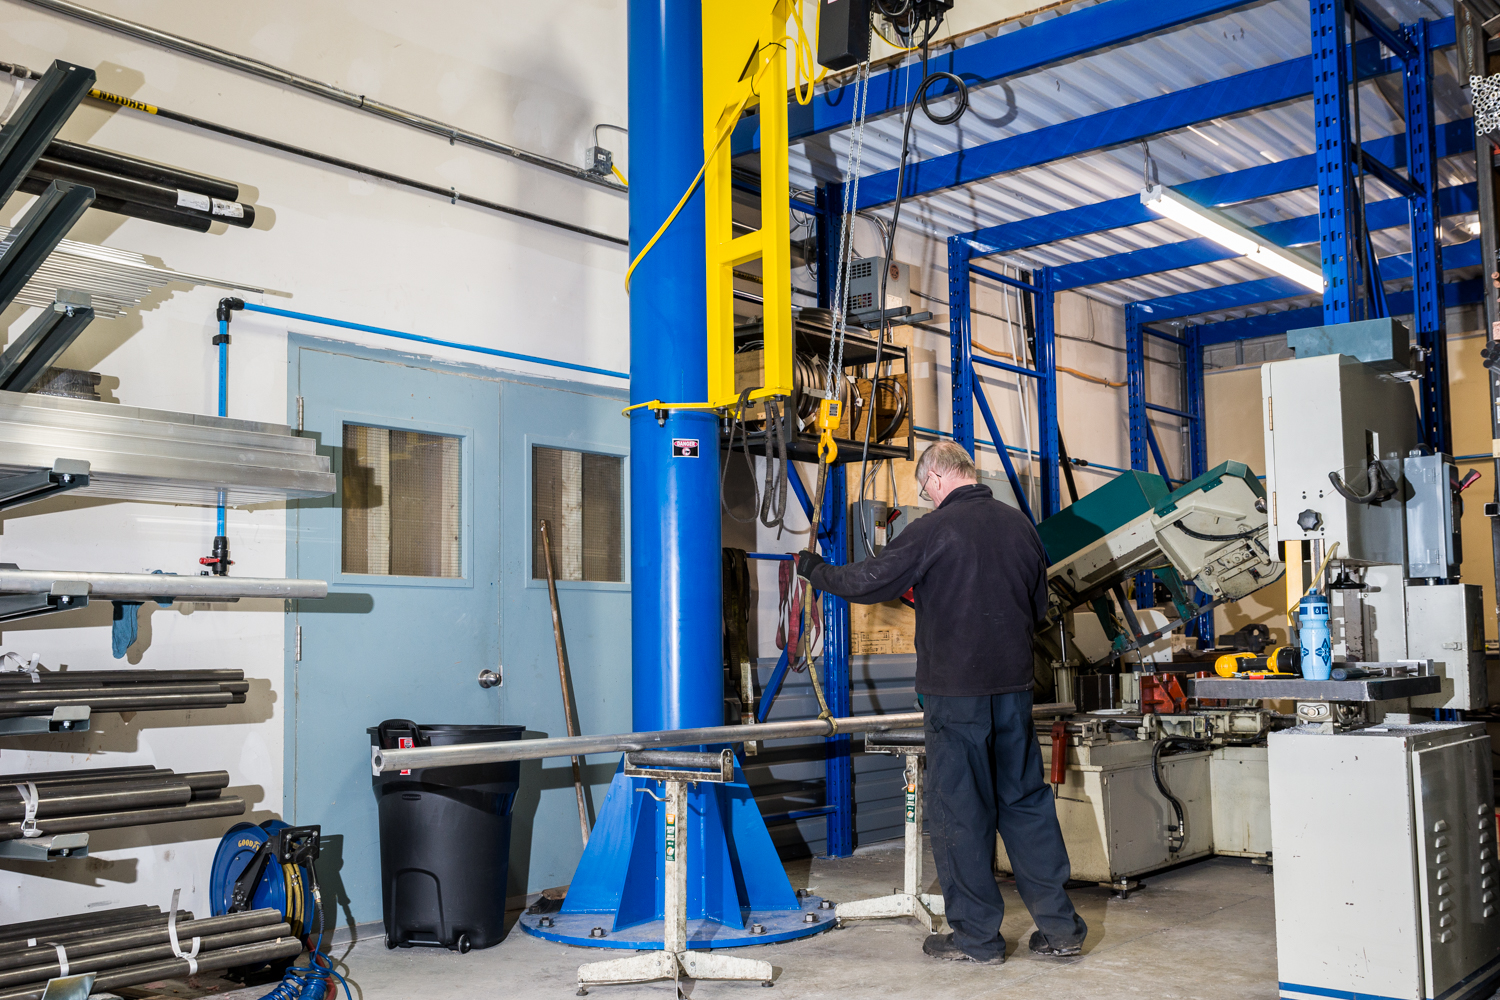 a new jib crane leads to savings for this machining workshop